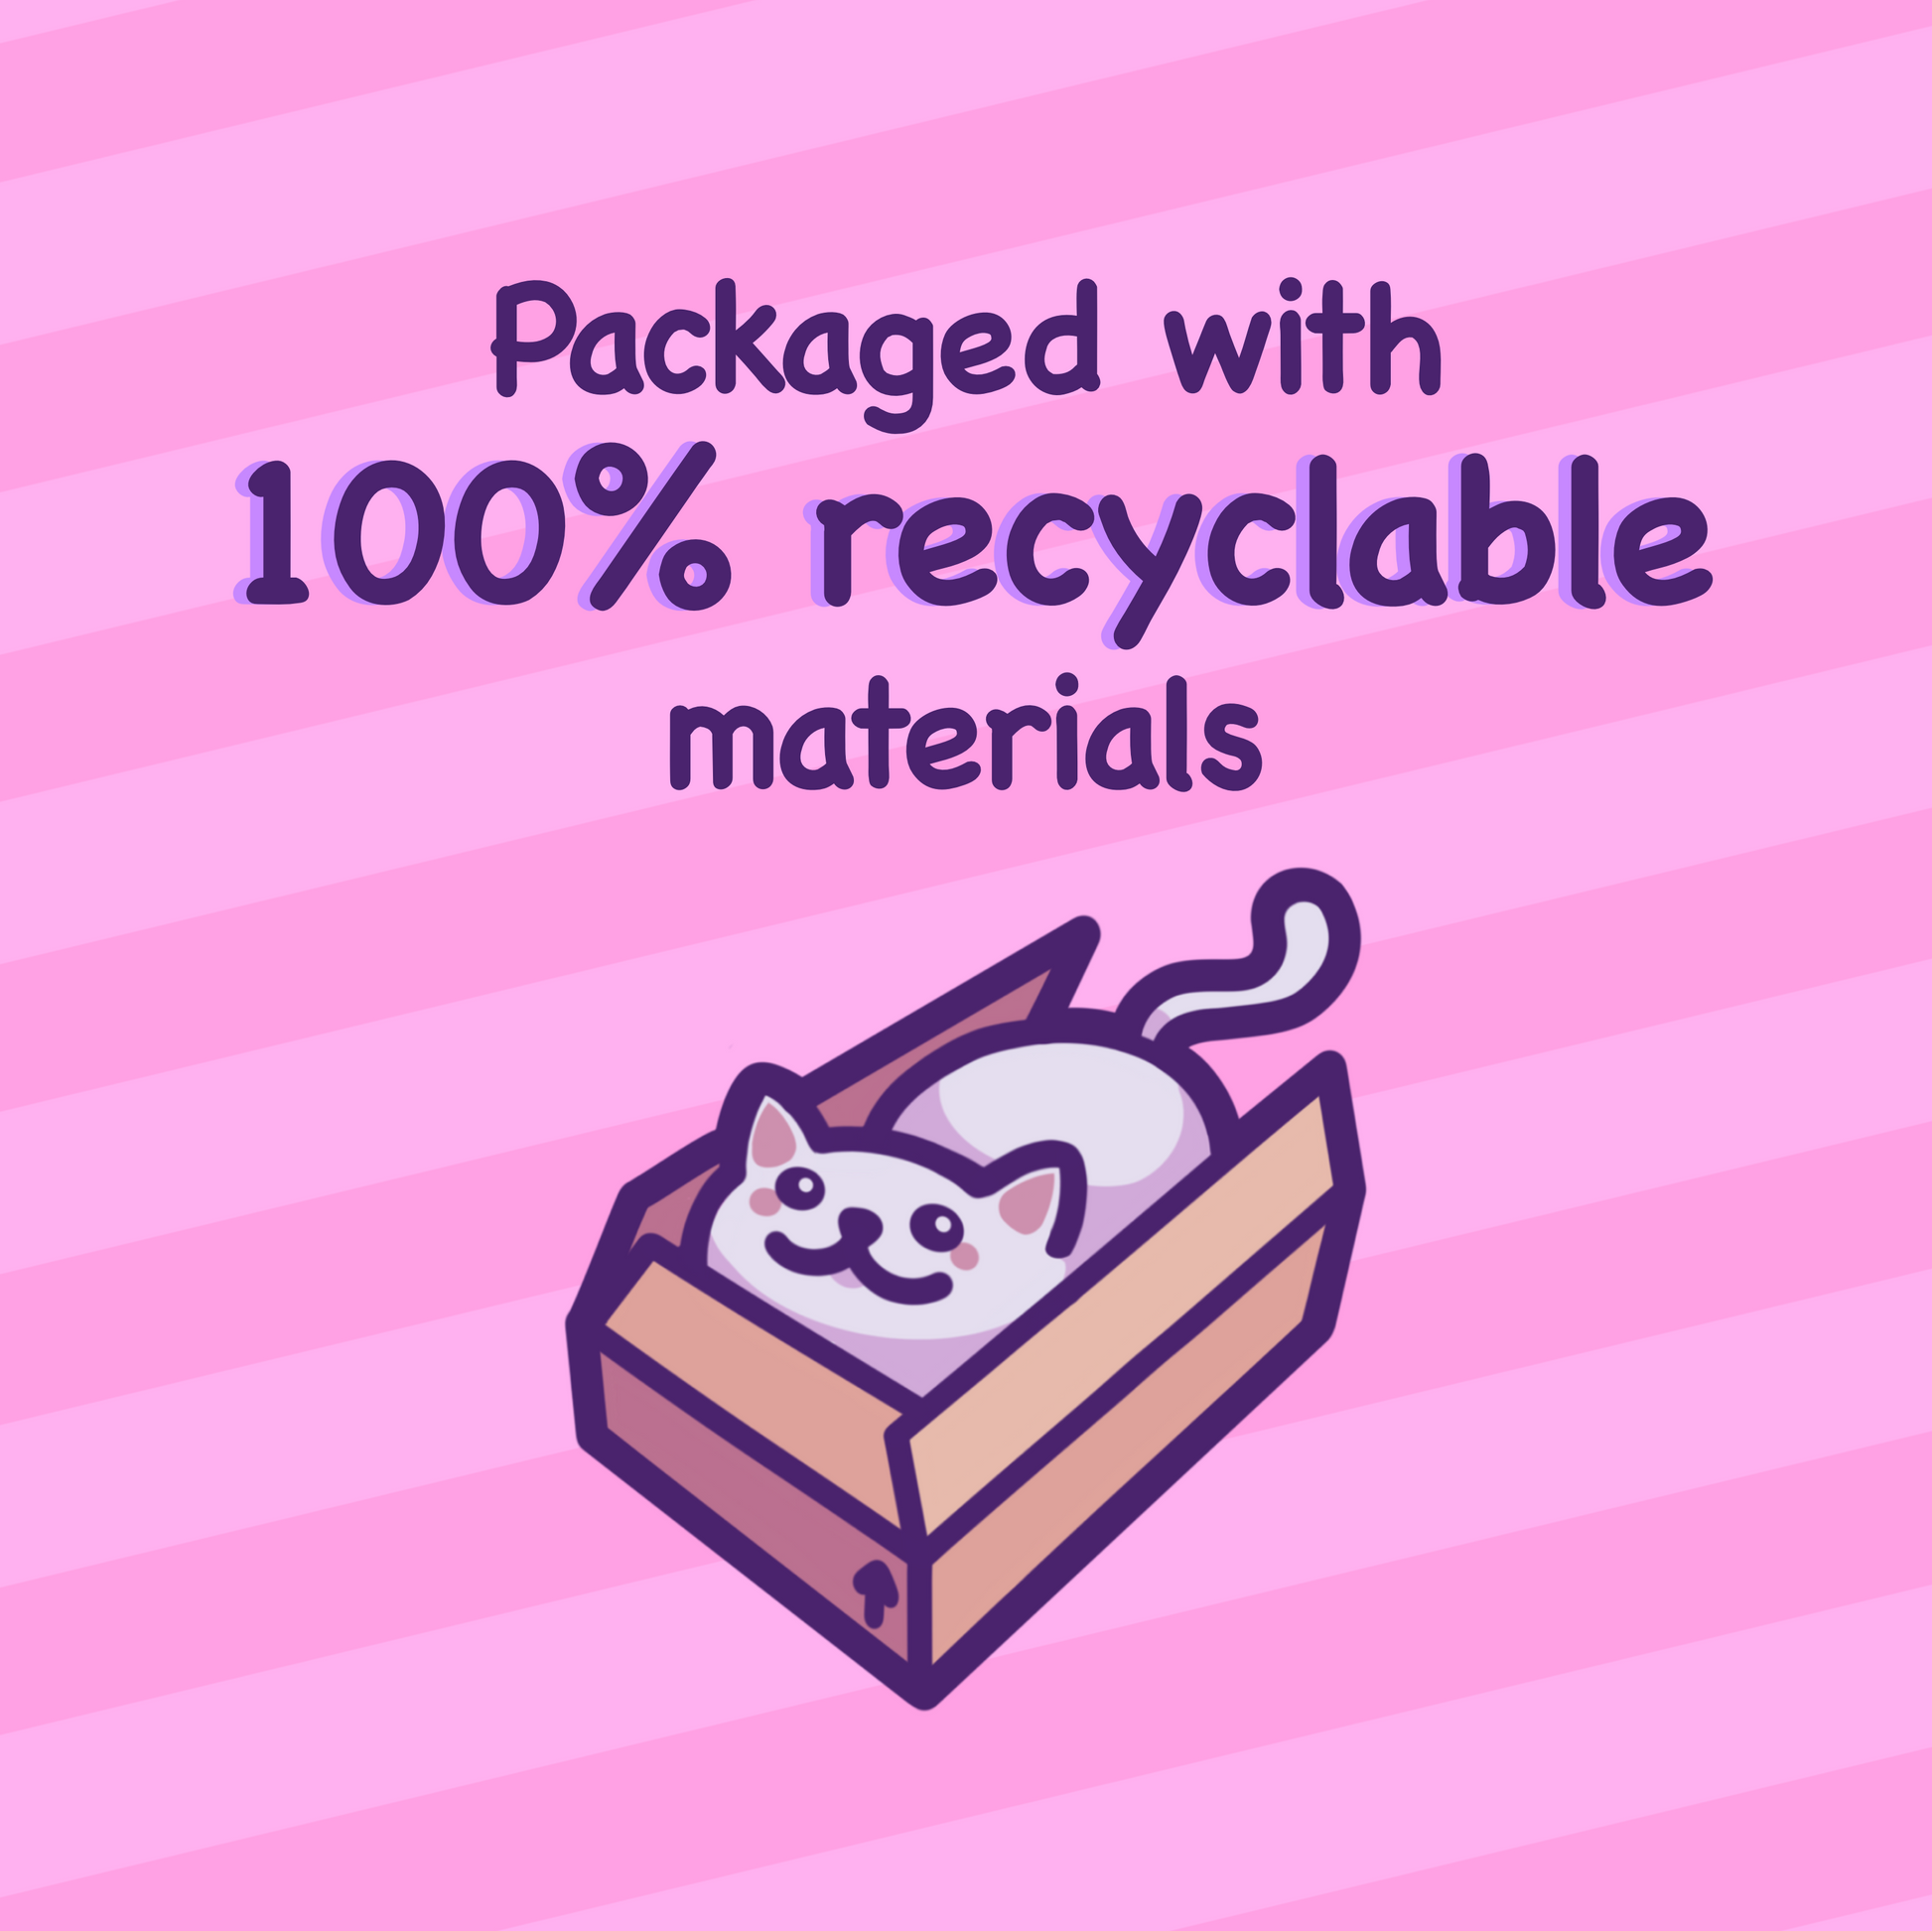 Packaged with 100% recyclable materials.